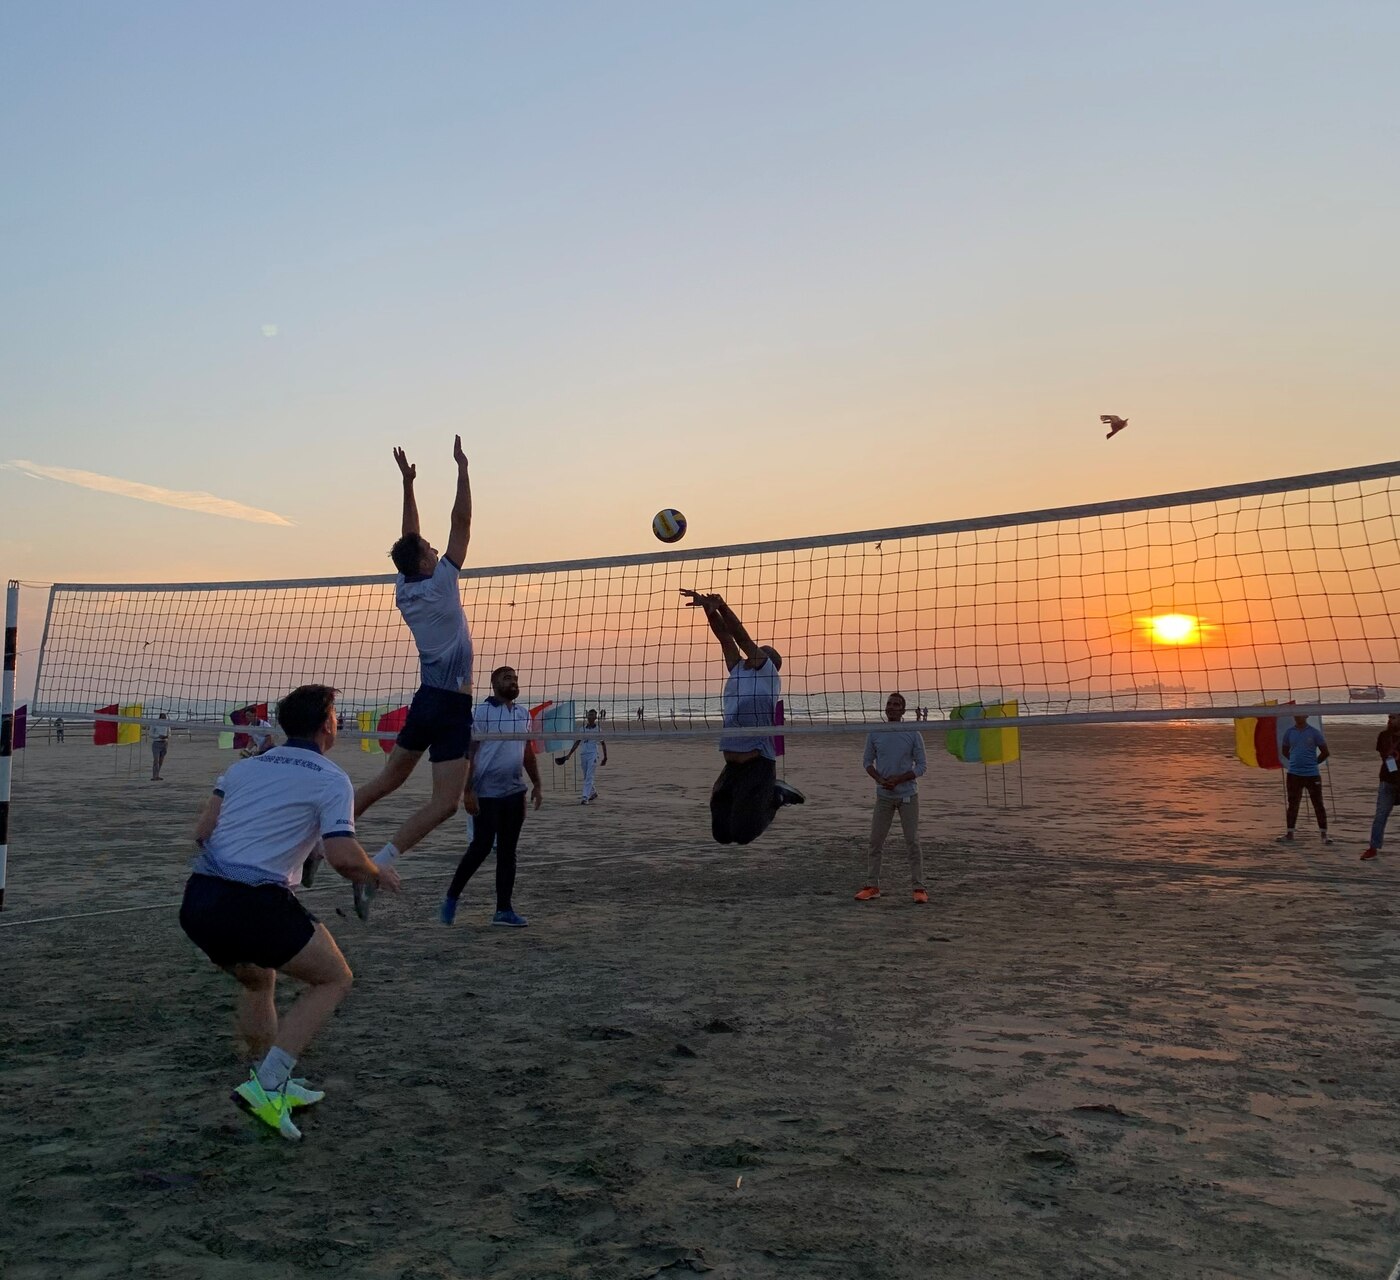 COX’S BAZAR, Bangladesh (Dec. 8, 2022) – Bangladesh Navy (BN) Sailors and Sailors attached to the Independence-variant littoral combat ship USS Oakland (LCS 24) play volleyball during International Fleet Review (IFR) 2022 in Cox’s Bazar, Bangladesh, Dec. 8. Oakland is participating in IFR 2022 organized by the Bangladesh Navy, which intends to promote good will, strengthen cooperation and serve as an ideal platform for world’s navies to showcase their prowess, naval diplomacy, and cooperation in a global arena. (U.S. Navy courtesy photo)